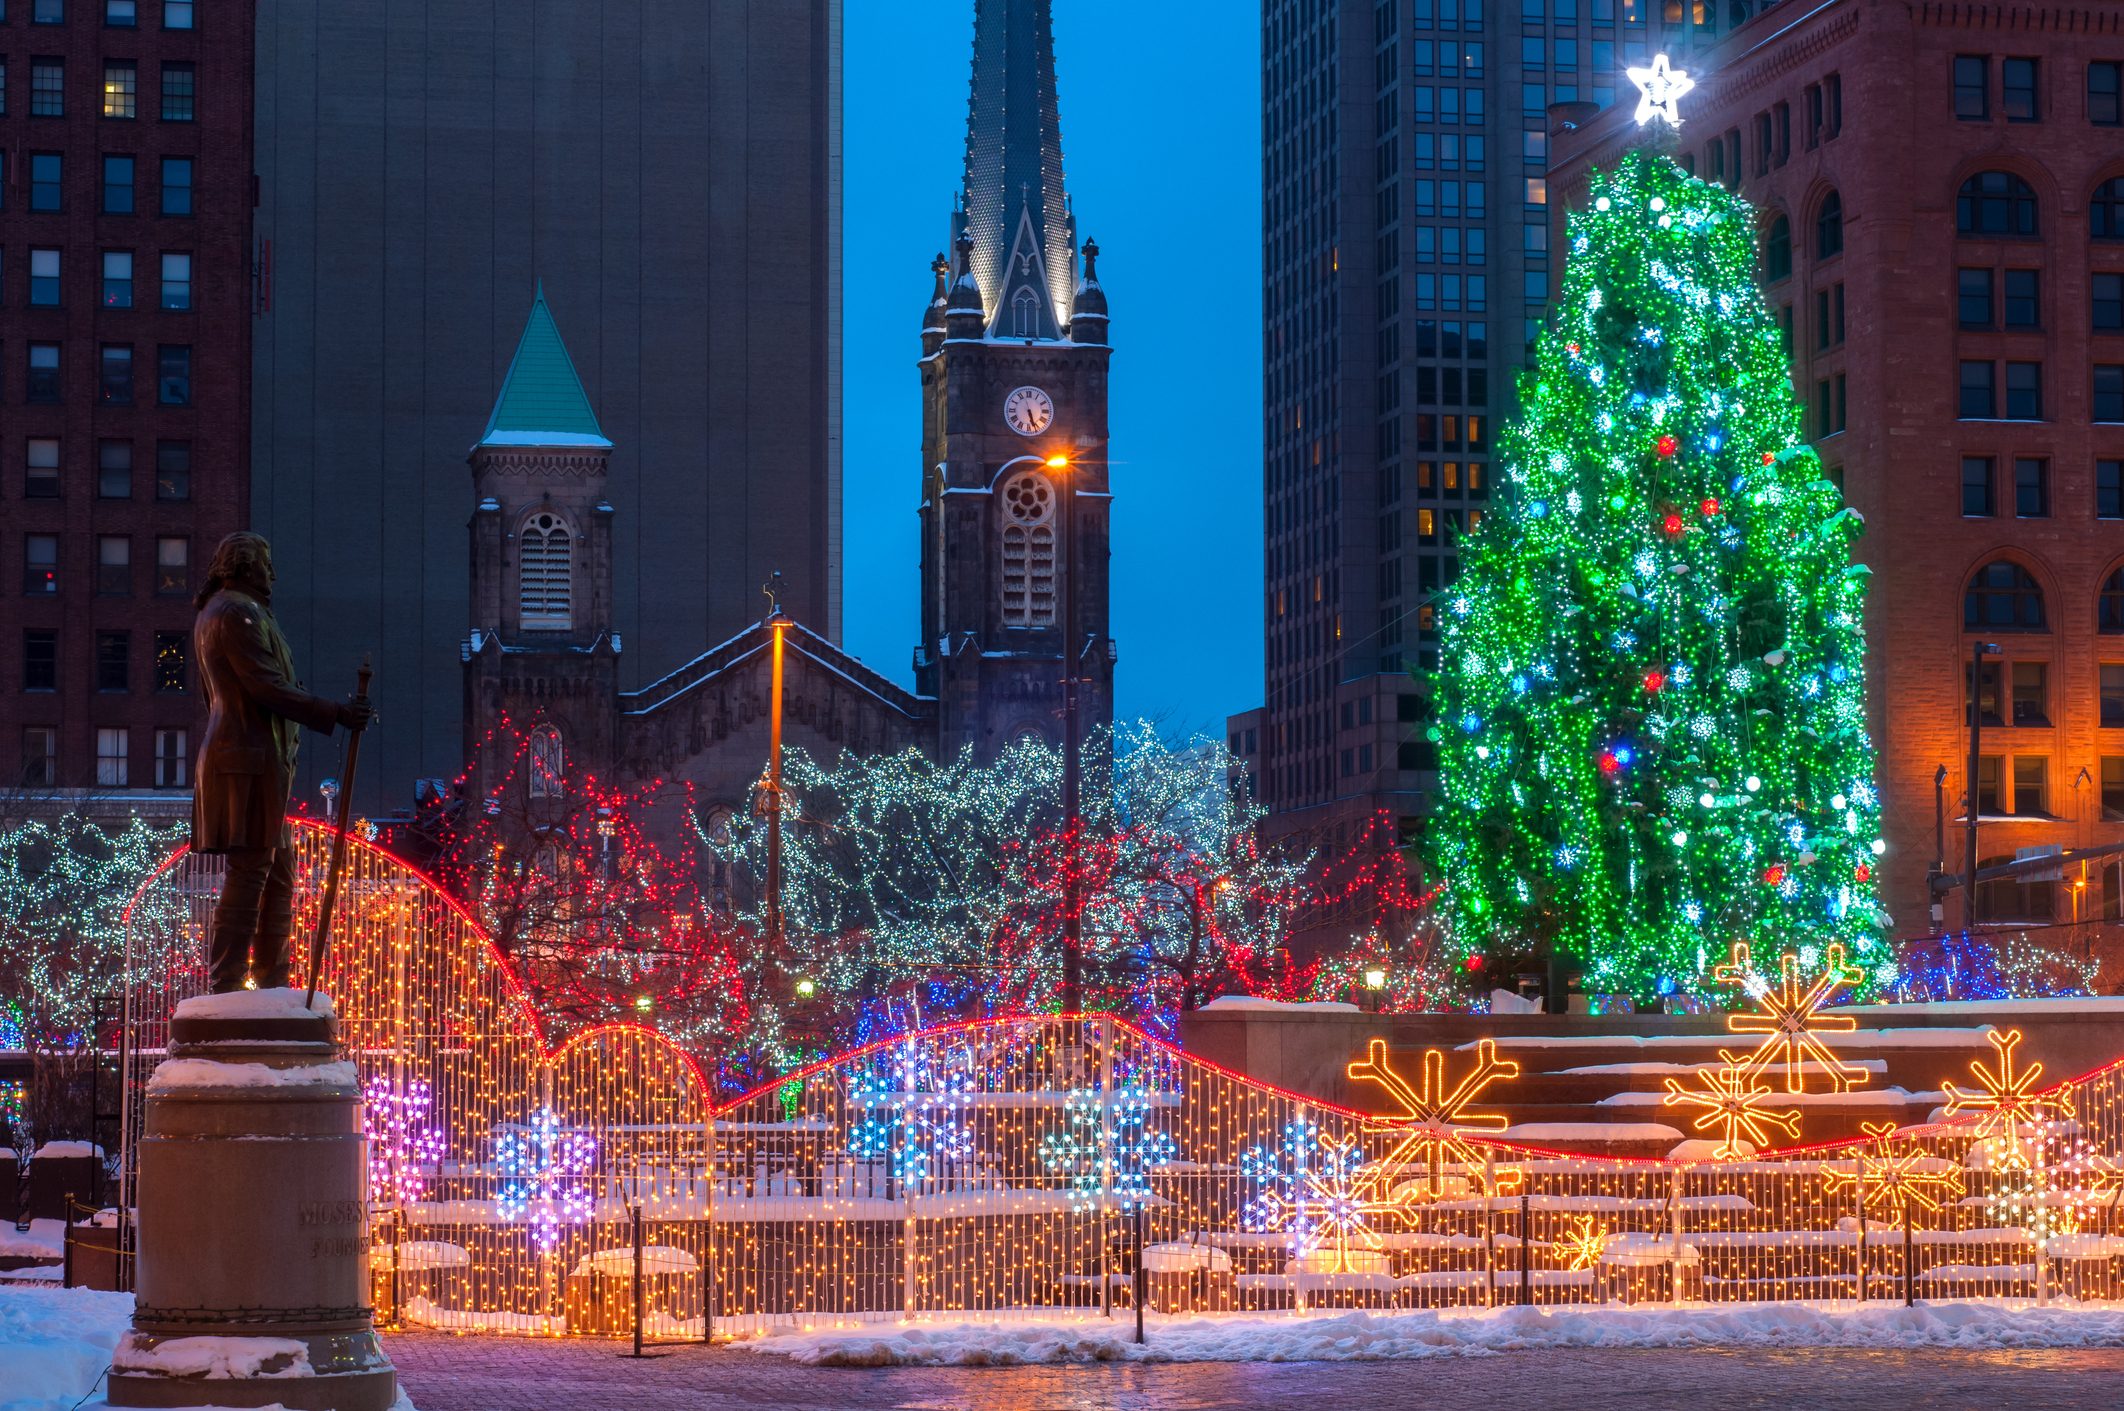 <p class=""><strong>Best for:</strong> Fans of <em>A Christmas Story</em></p> <p>There are tons of holiday events going on in downtown Cleveland, but we suggest you visit the modest Tremont neighborhood. It's home to the <a href="https://www.rd.com/list/things-never-knew-a-christmas-story/" rel="noopener"><em>A Christmas Story</em></a> House, the original home used to film the classic 1983 movie. Restored by a superfan to match the interior sets (only the exterior of the house was used in filming), it's now a near-replica of Ralphie's house. You can even stay in the house overnight! Visit the museum across the street for more props, costumes and memorabilia from the movie. Then head downtown for holiday musical performances, the Winterfest event and a visit to Public Square, where Higbee's department store building (in which Ralphie first spots his Red Ryder BB Gun and later has a run-in with Santa) still stands. For more Christmas events, head over to Playhouse Square to see a theatrical performance of <em>A Christmas Carol</em> and <em>The Nutcracker</em>. Plus, the Cleveland Botanical Garden’s has a new "Frost" display.</p> <p>If you don't stay in the Christmas Story House itself, consider the <a href="https://www.tripadvisor.com/Hotel_Review-g50207-d9862281-Reviews-Drury_Plaza_Hotel_Cleveland_Downtown-Cleveland_Ohio.html" rel="noopener">Drury Plaza Hotel</a>. Just a five-minute walk from Public Square, the hotel in a historic building offers comfortable accommodations with amenities like an indoor pool and a great breakfast to start your day of holiday activities.</p> <p class="listicle-page__cta-button-shop"><a class="shop-btn" href="https://www.tripadvisor.com/Hotel_Review-g50207-d9862281-Reviews-Drury_Plaza_Hotel_Cleveland_Downtown-Cleveland_Ohio.html">Book Now</a></p>